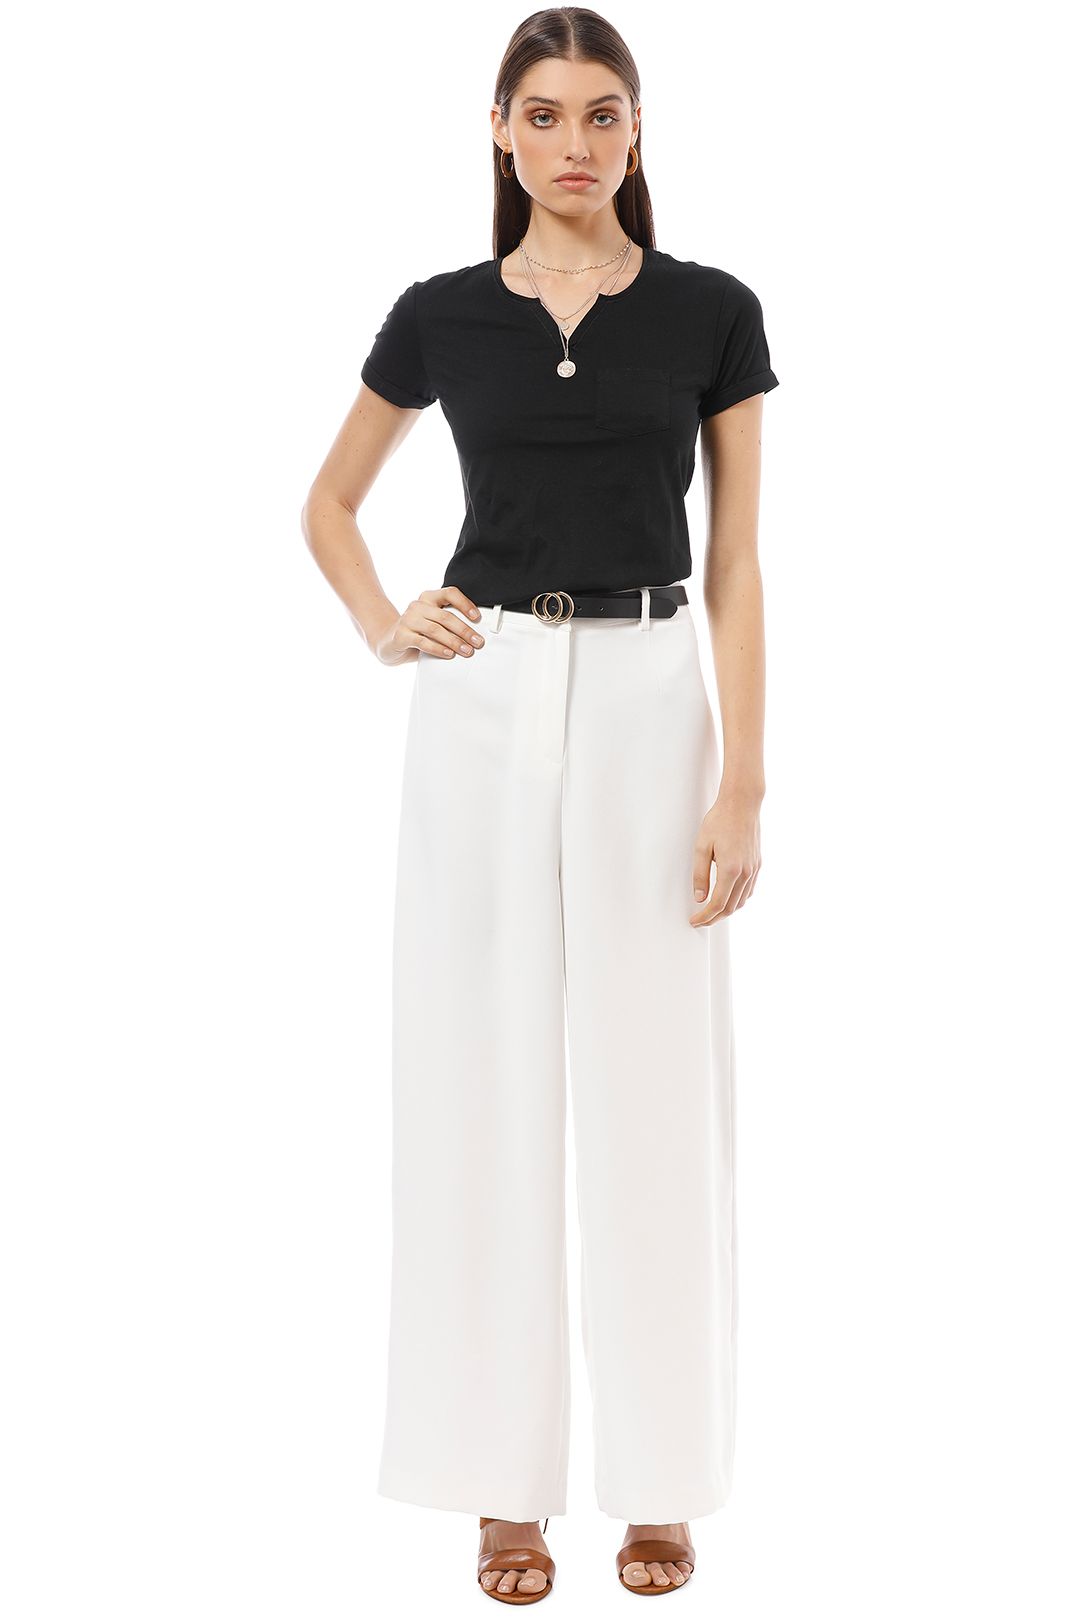 Friend of Audrey - Anya White Palazzo Pants - White - Front